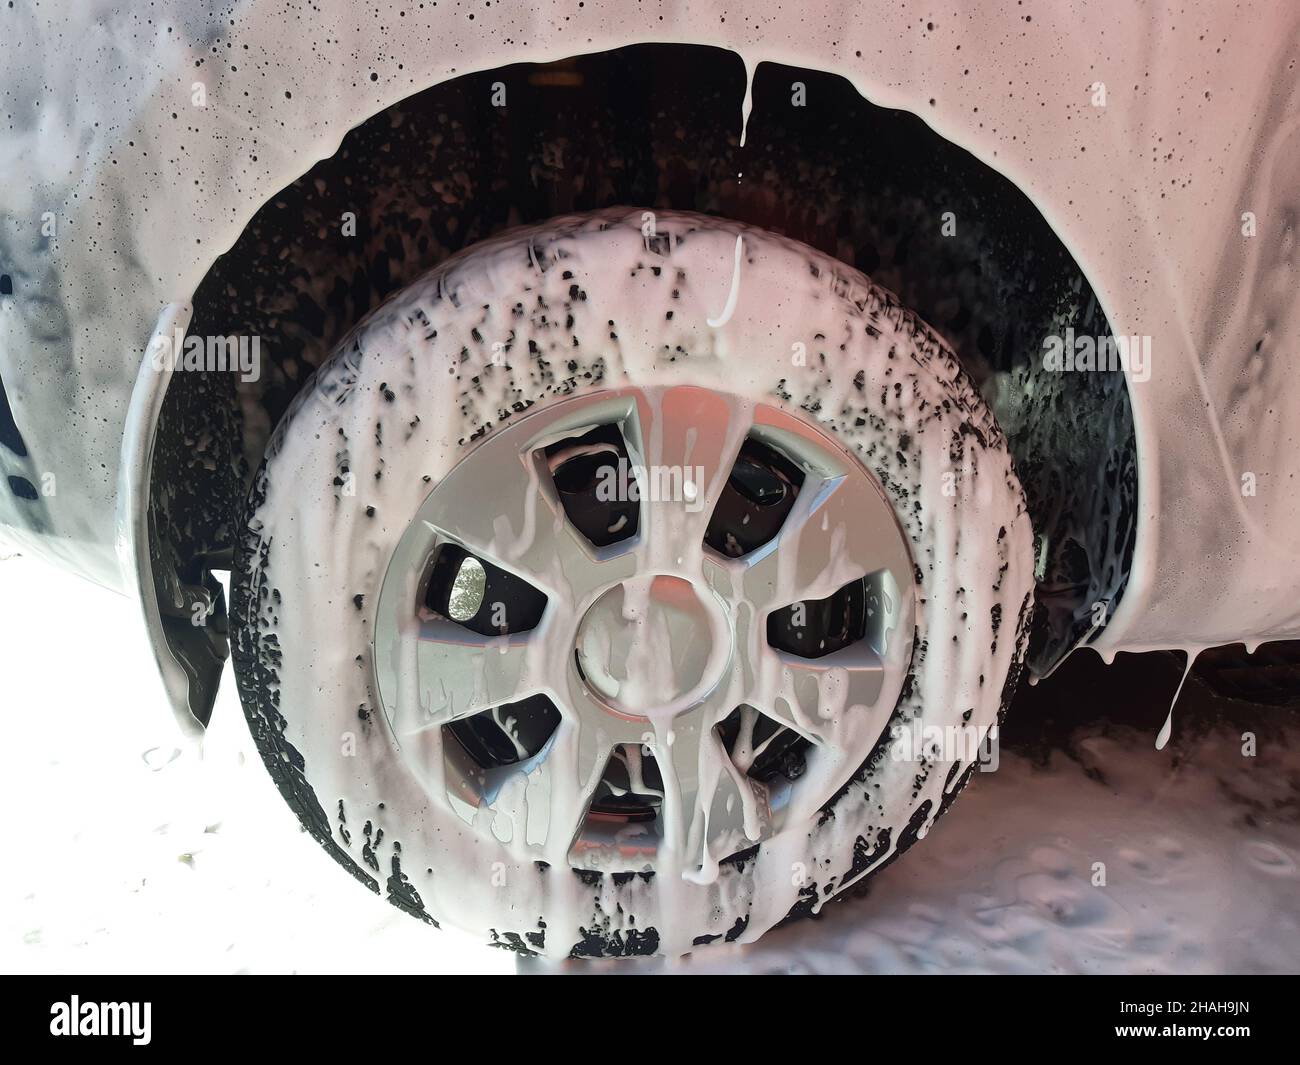 The wheel of the car and part of the fender of the car are all completely covered in white foam at the car wash prepared for washing off with water. F Stock Photo